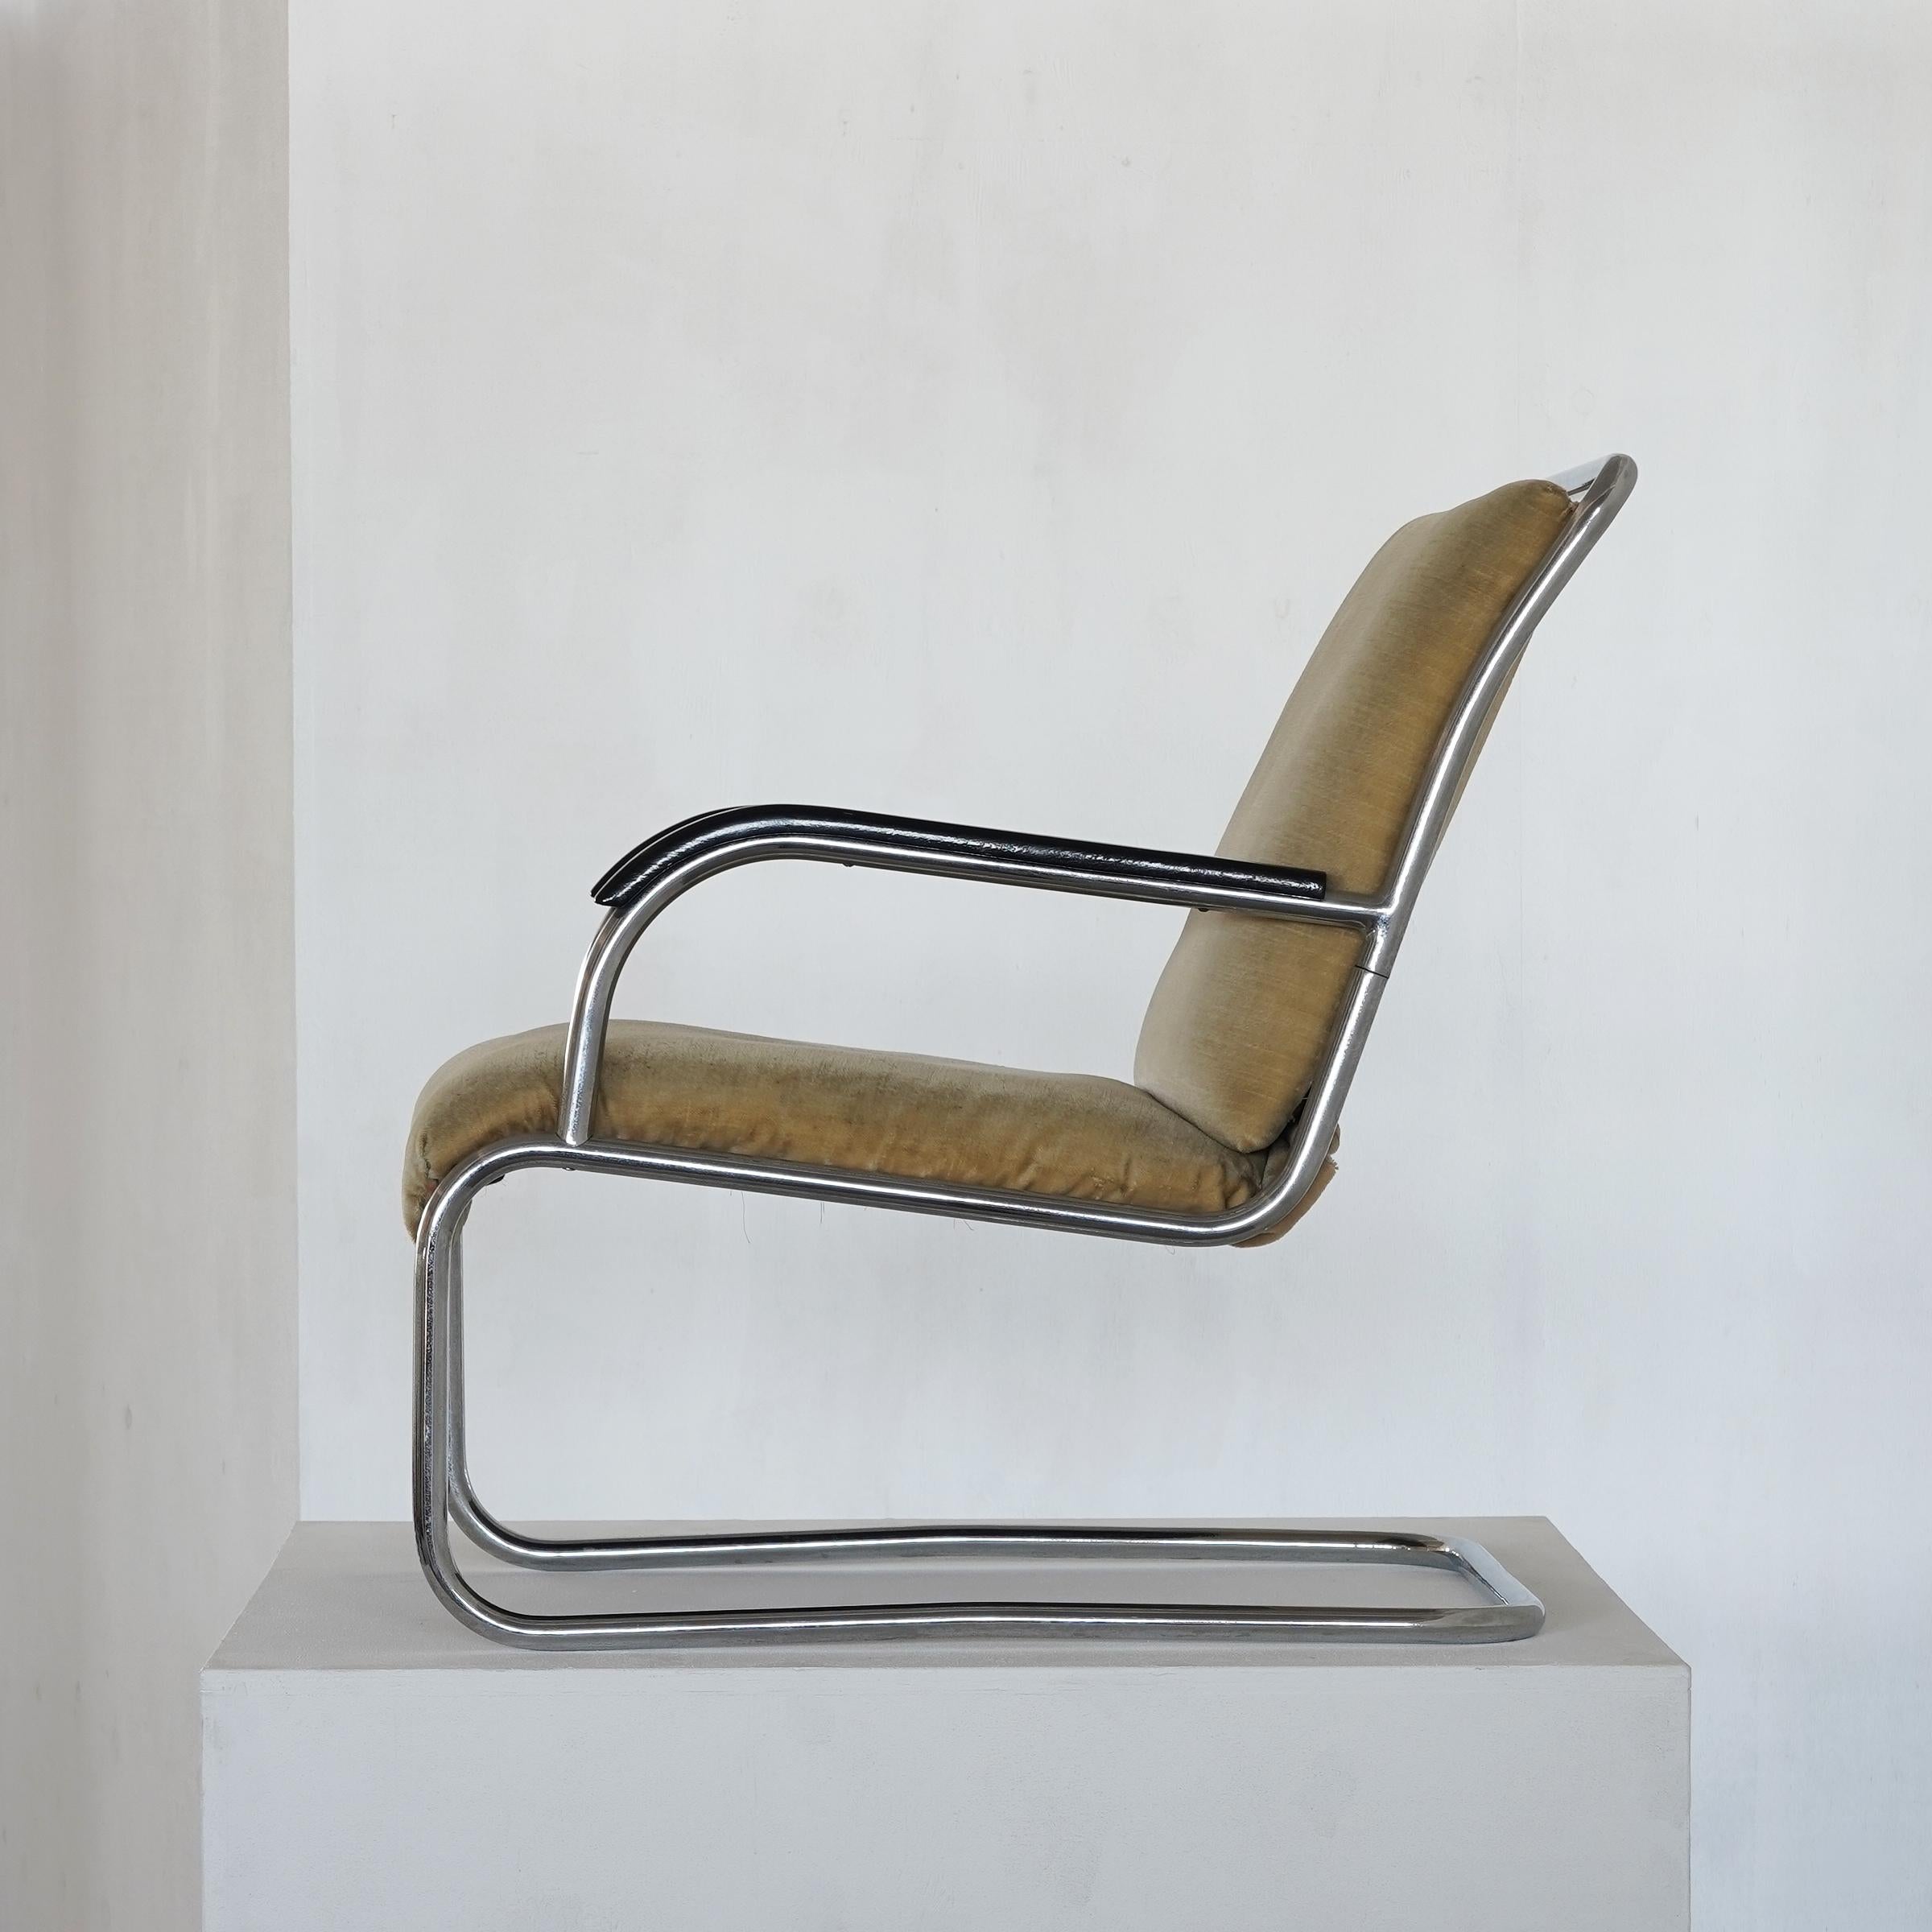 Very original and rare early cantilever chair by Paul Schuitema.

In the 1930’s this cantilever tubular design was very modern and due to that striking design it still is modern – even in 2020. This is a really beautifully aged original example of